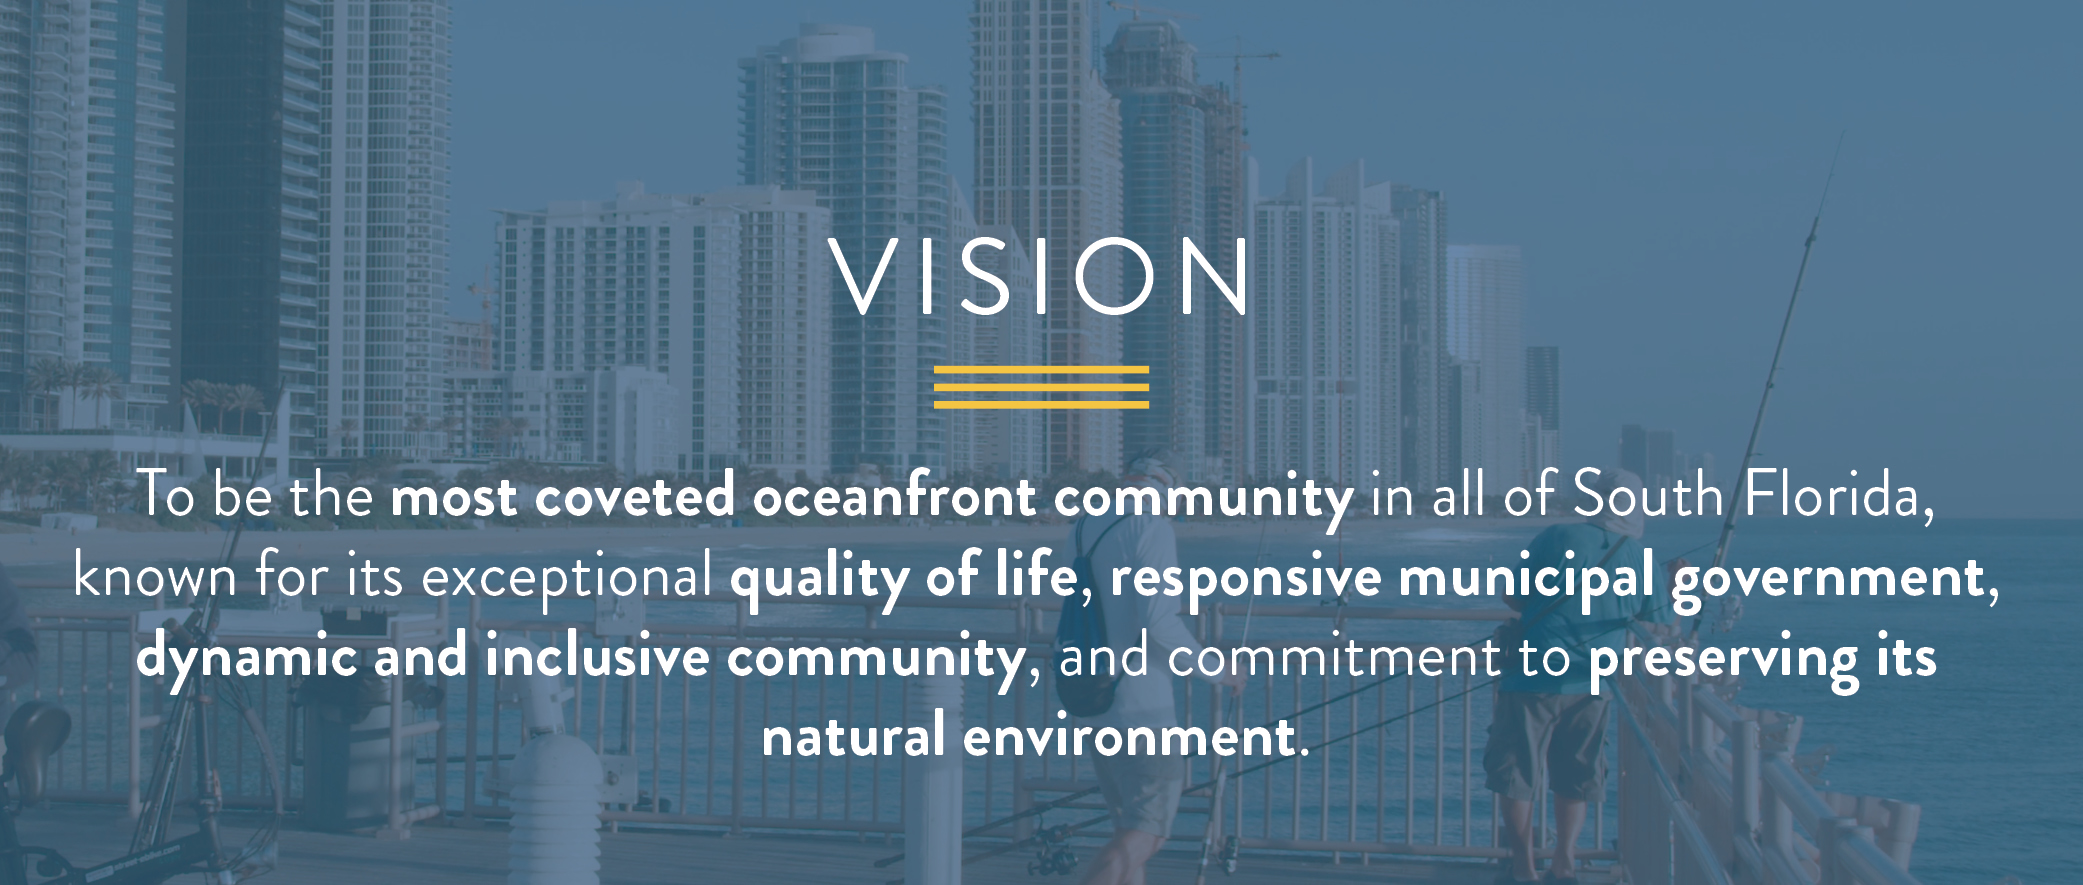 The vision is to be the most coveted oceanfront community in all of South Florida, known for its exceptional quality of life, responsive municipal government, dynamic and inclusive community, and commitment to preserving its natural environment.